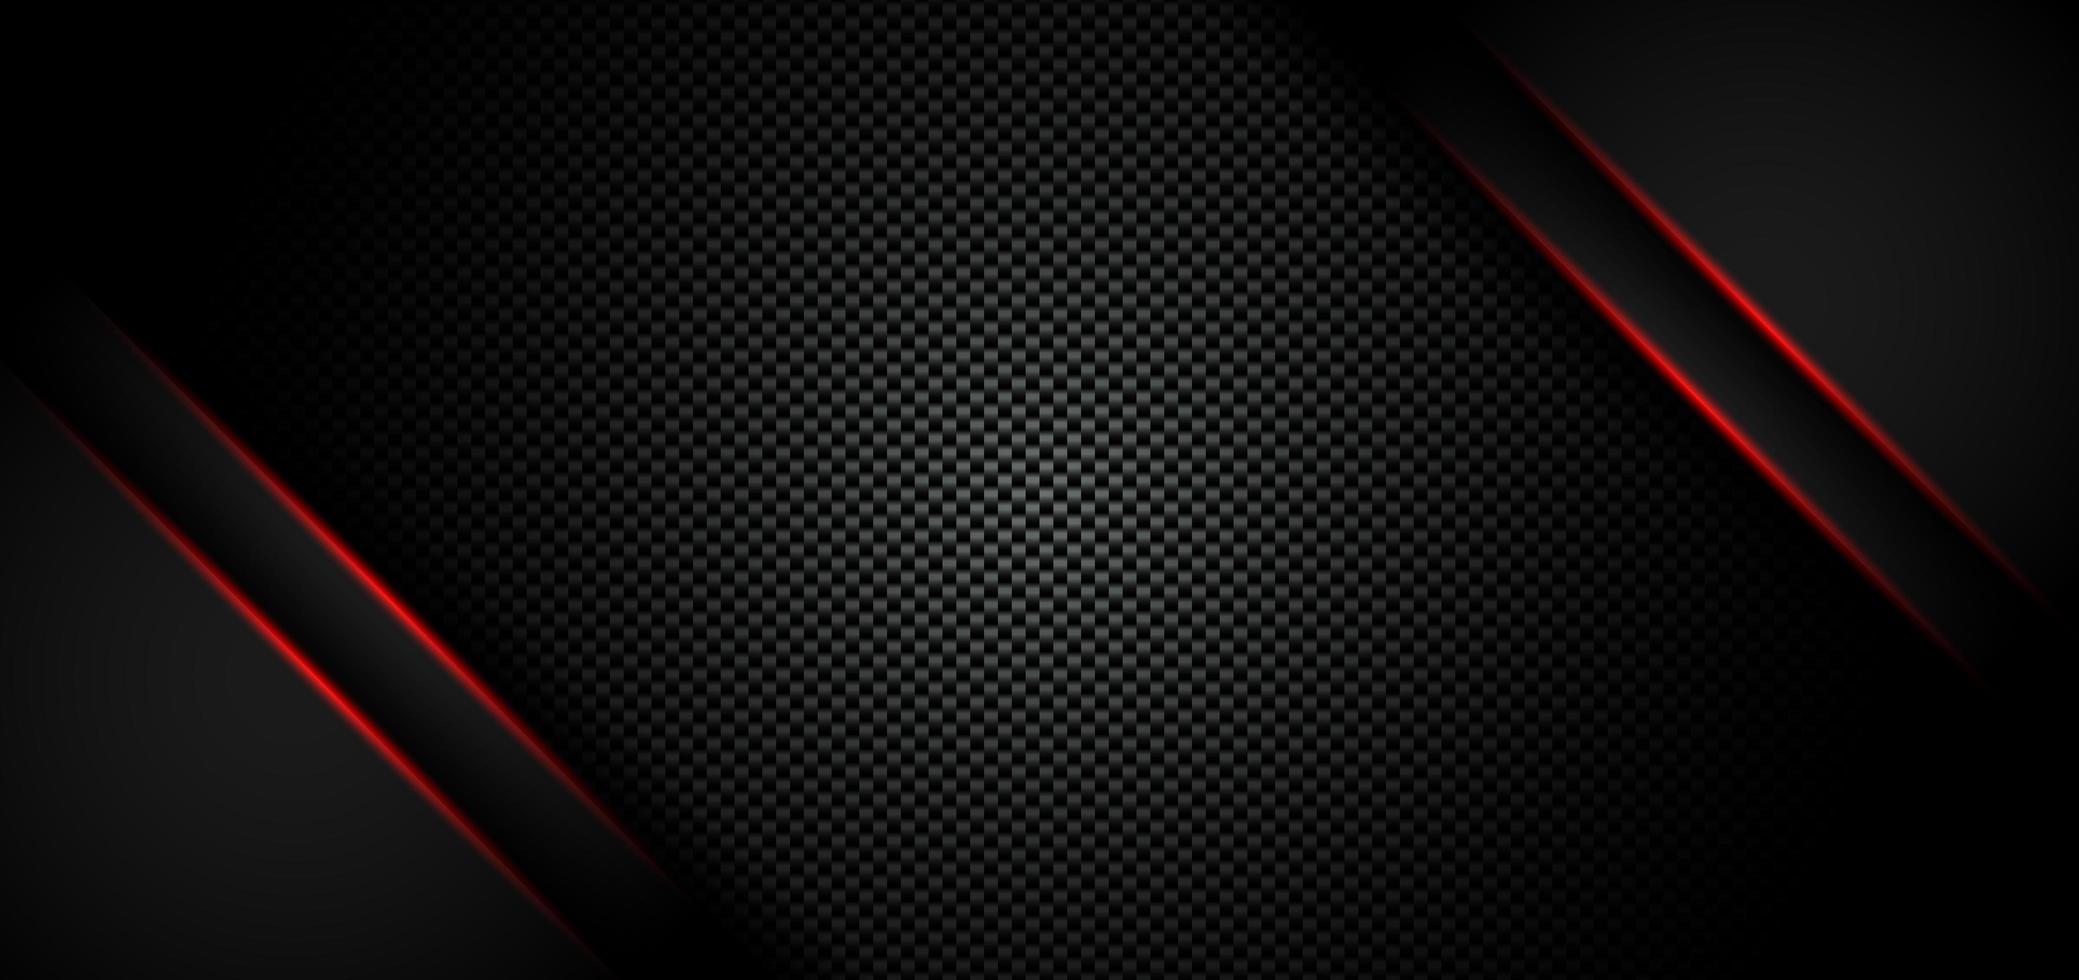 Abstract metallic red shiny color black frame layout modern tech design template on carbon fiber material background and texture vector